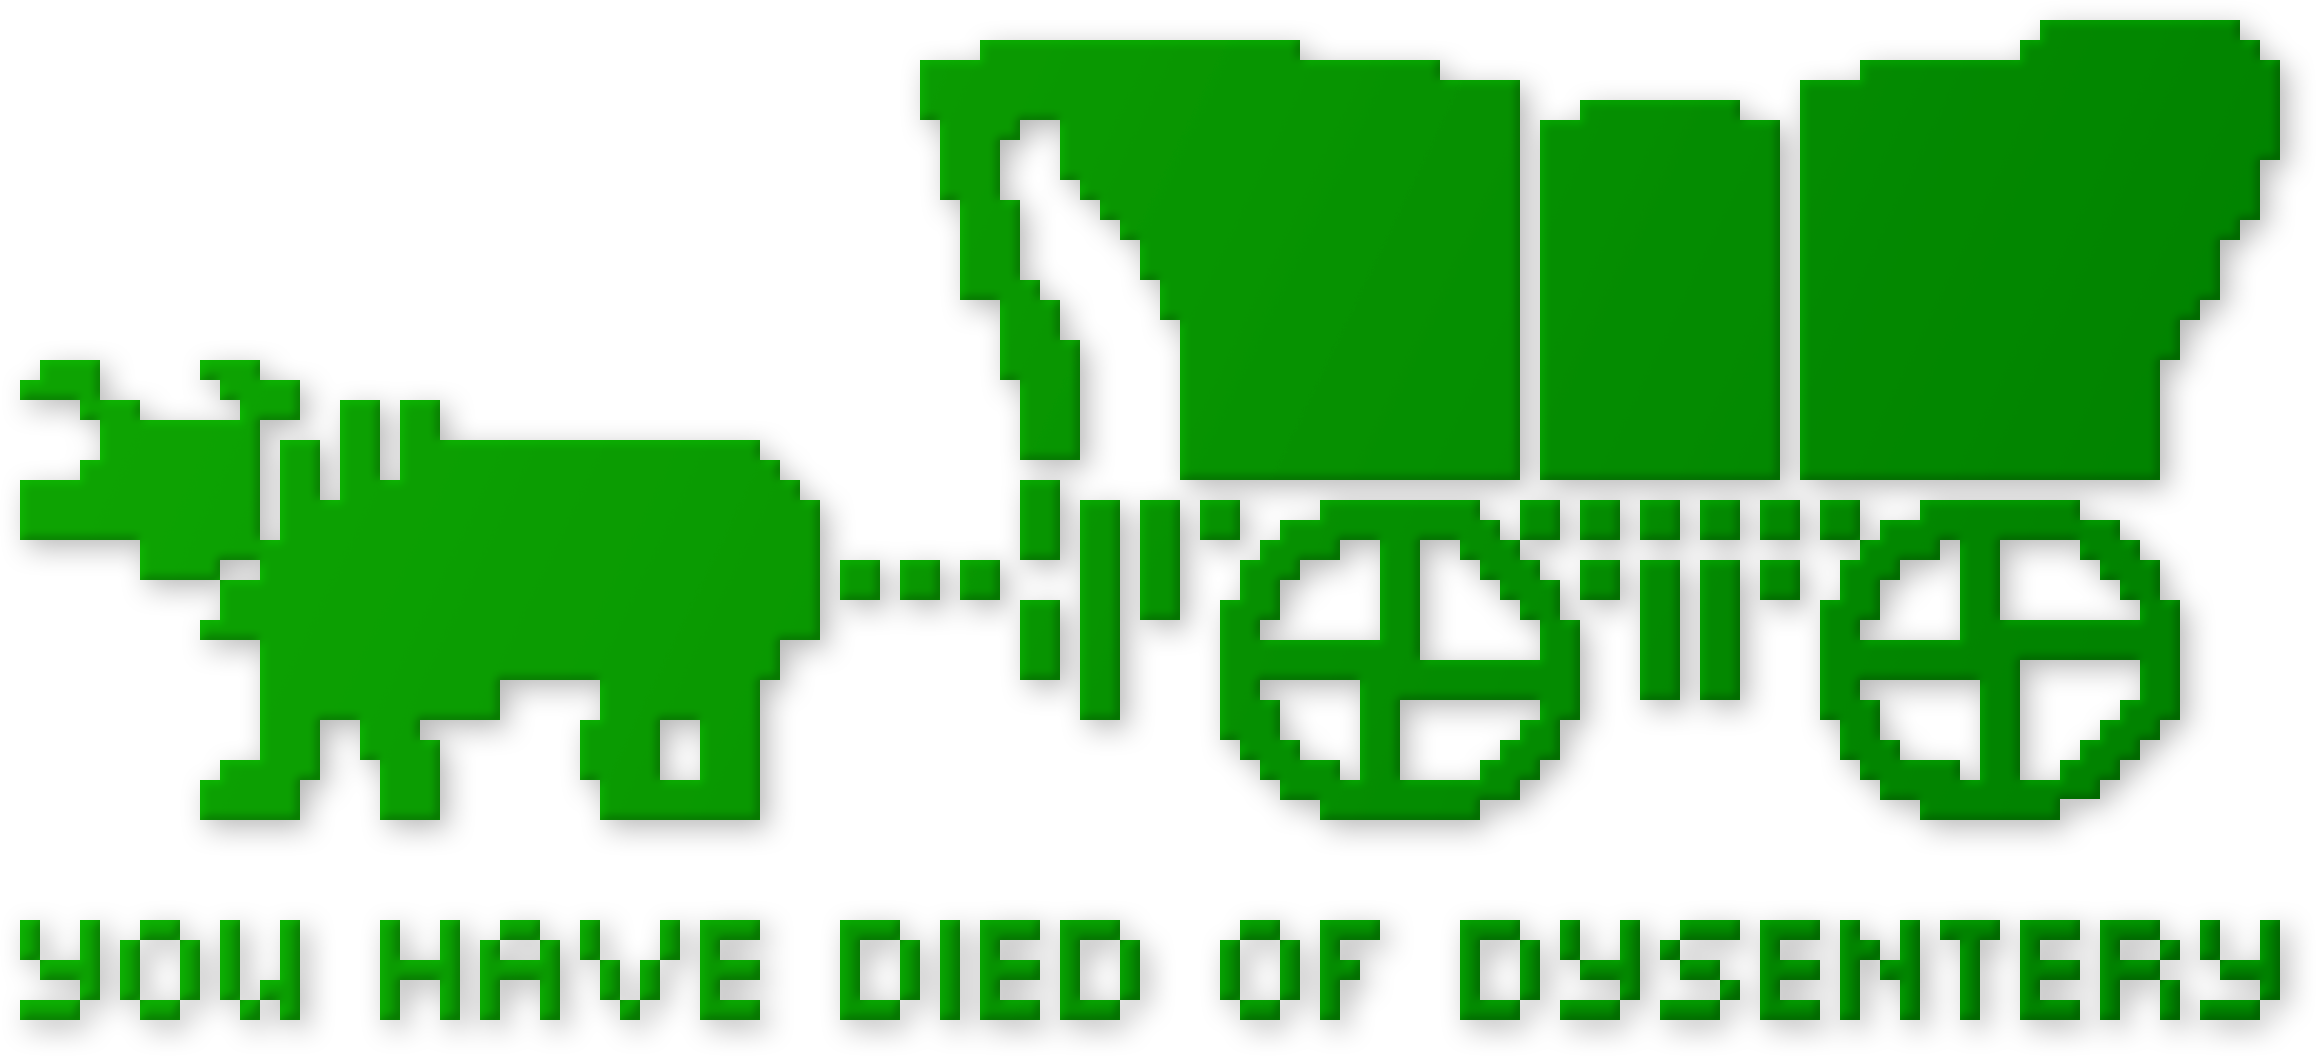 u0027You Have Died of Dysente